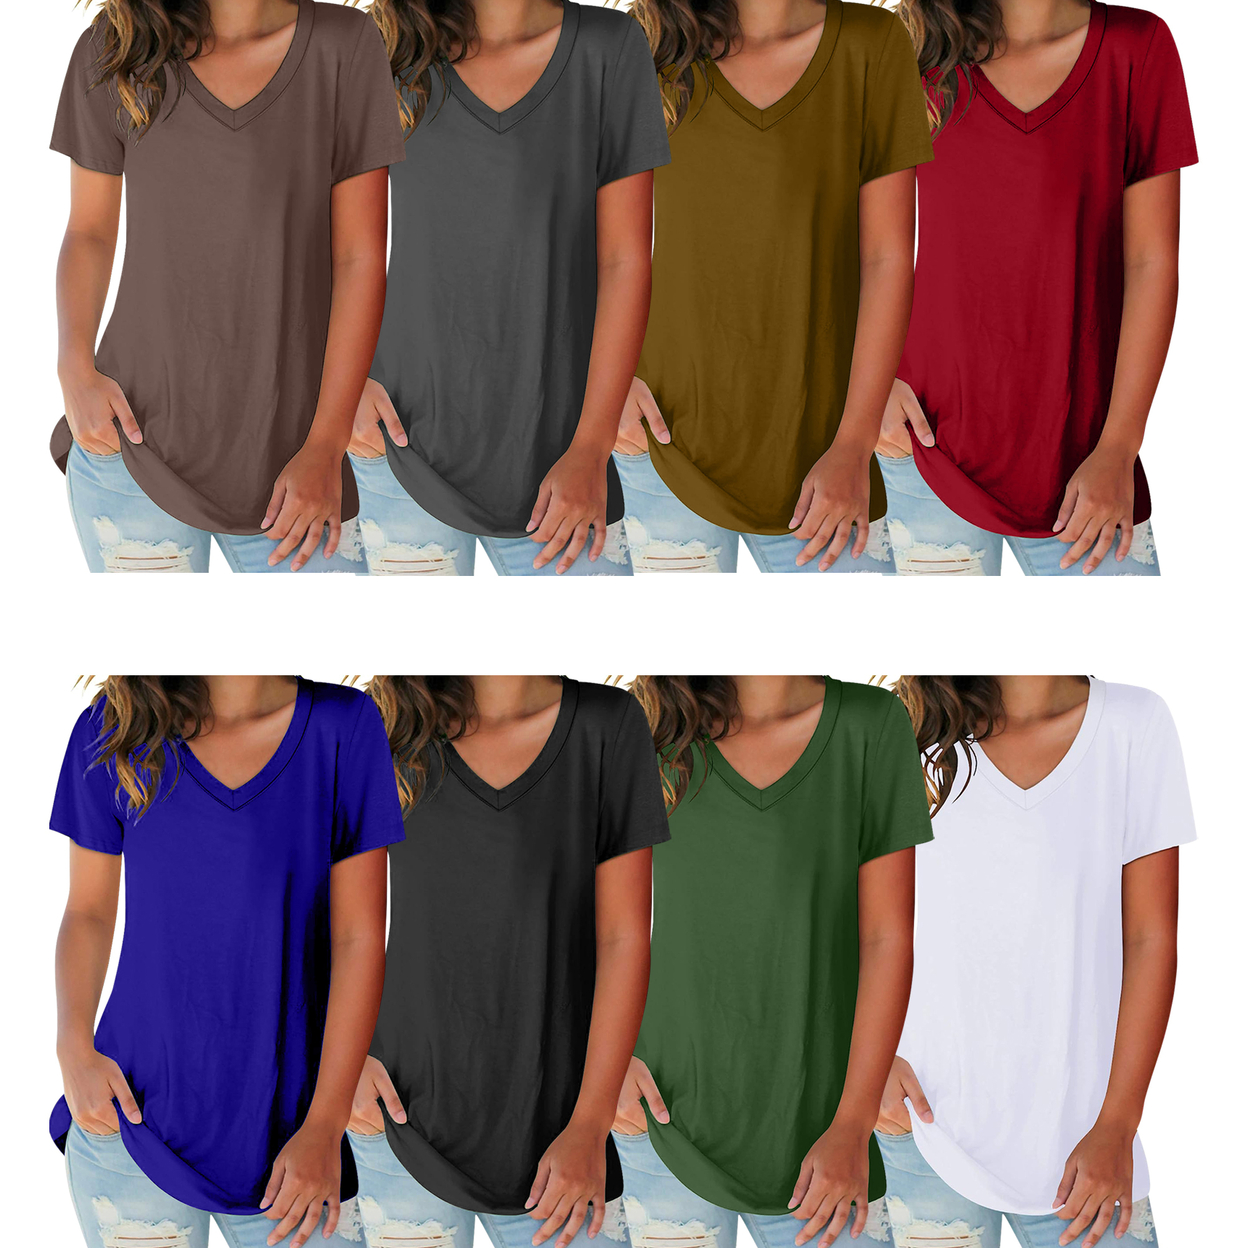 2-Pack: Women's Ultra Soft Smooth Cotton Blend Basic V-Neck Short Sleeve Shirts - Black & Red, Small